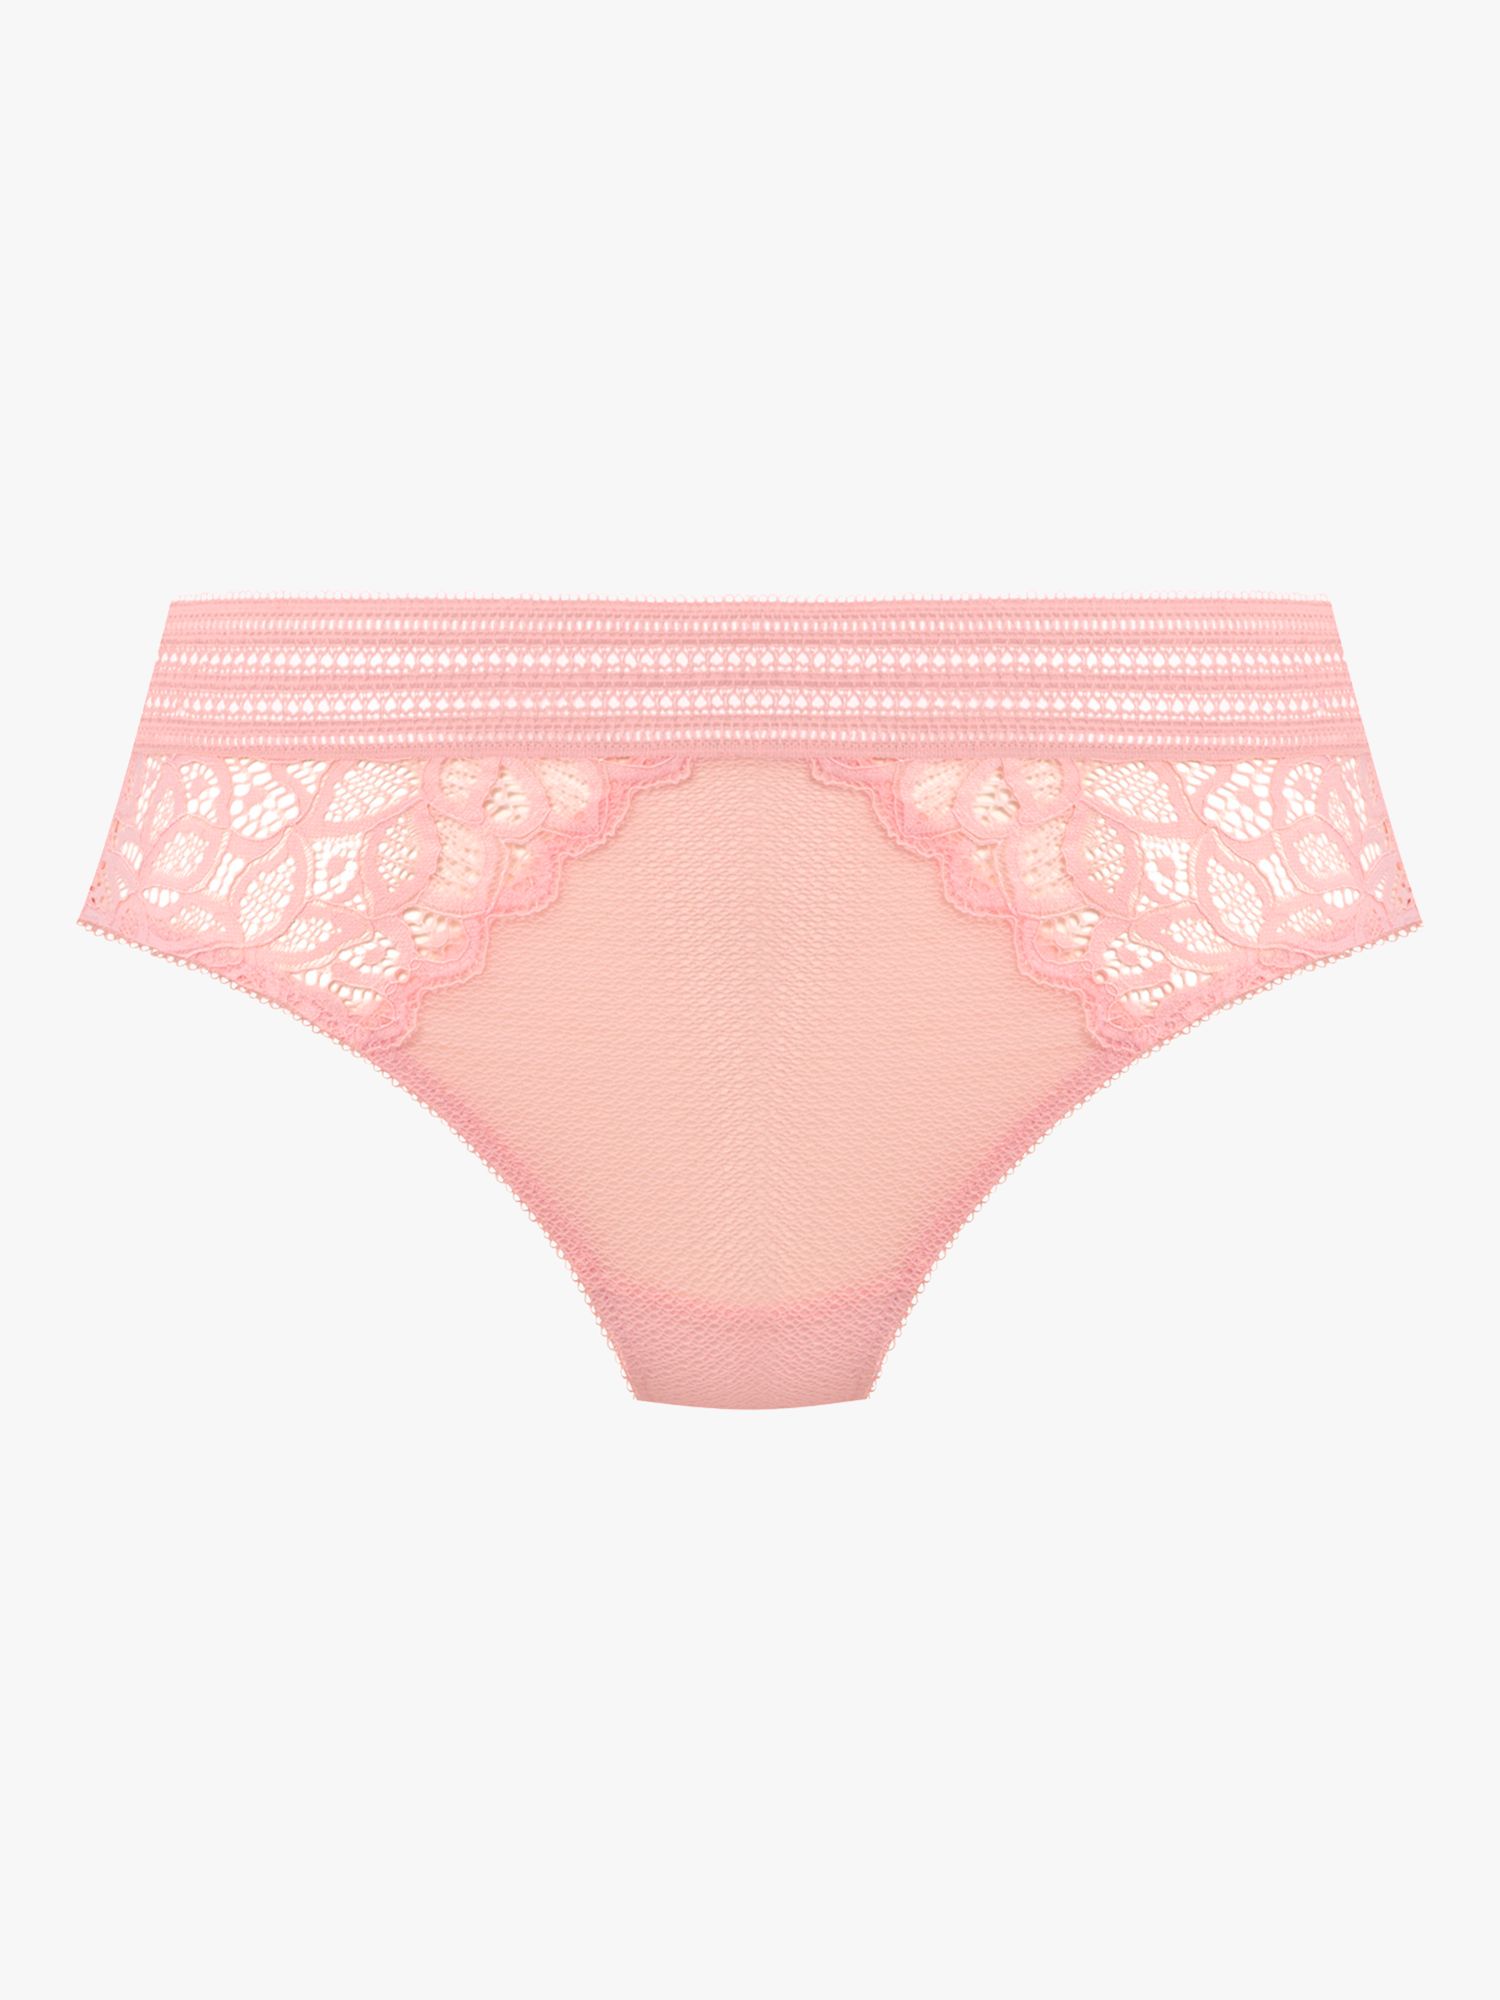 Buy Wacoal Raffiné Lace Knickers, Silver Pink Online at johnlewis.com